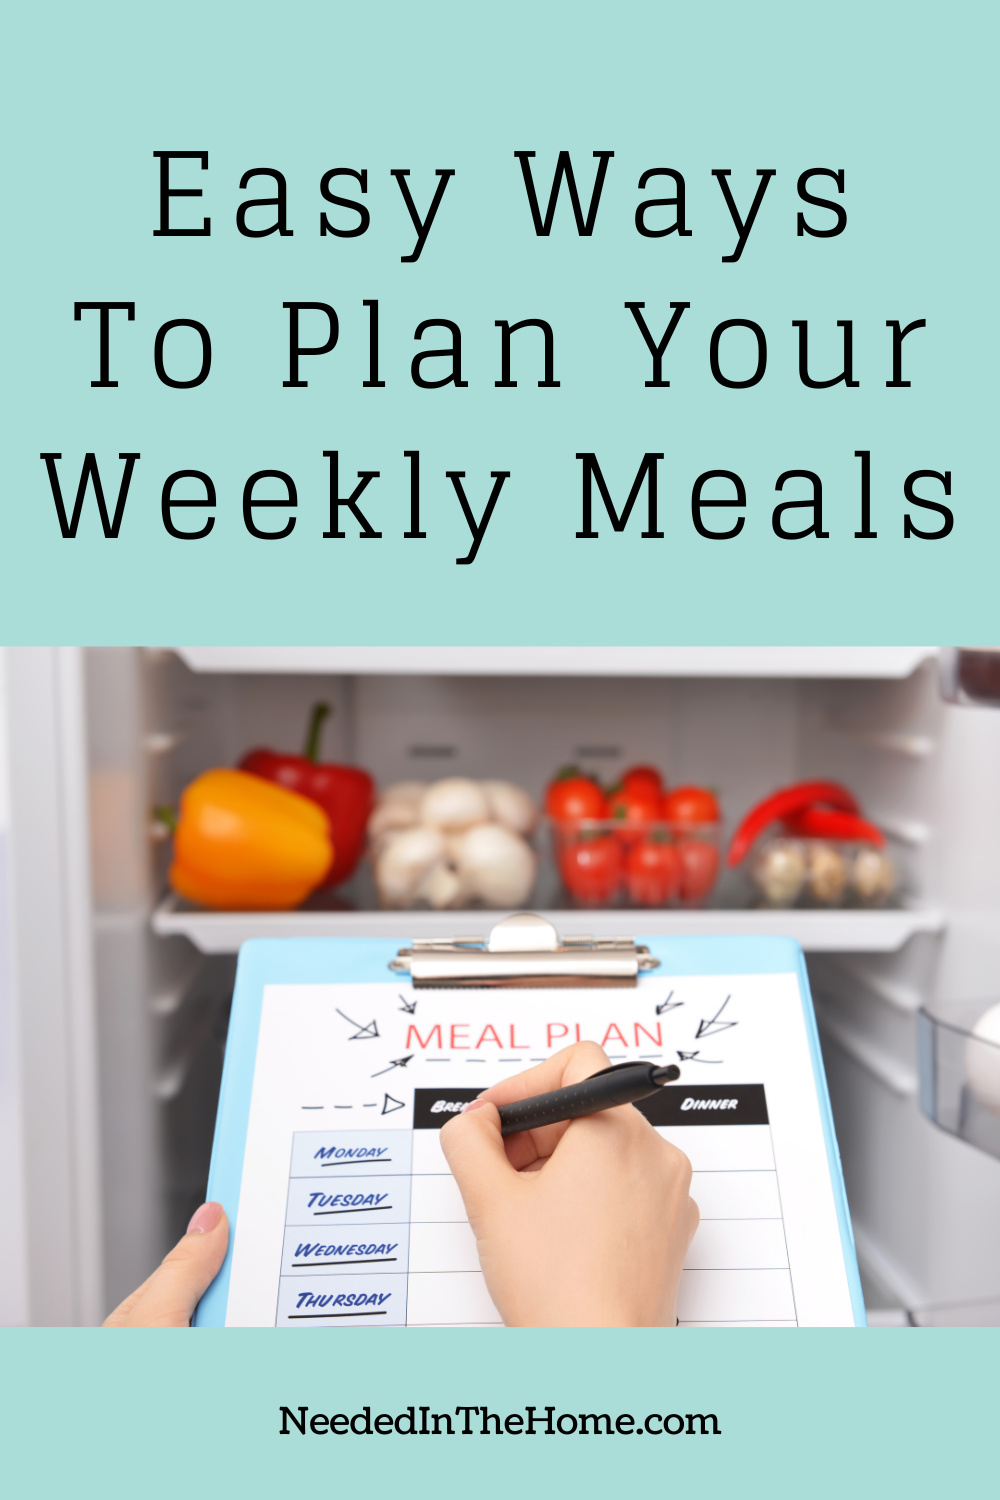 pinterest pin description easy ways to plan your weekly meals person's hand writing on a meal plan in front of the open refrigerator neededinthehome